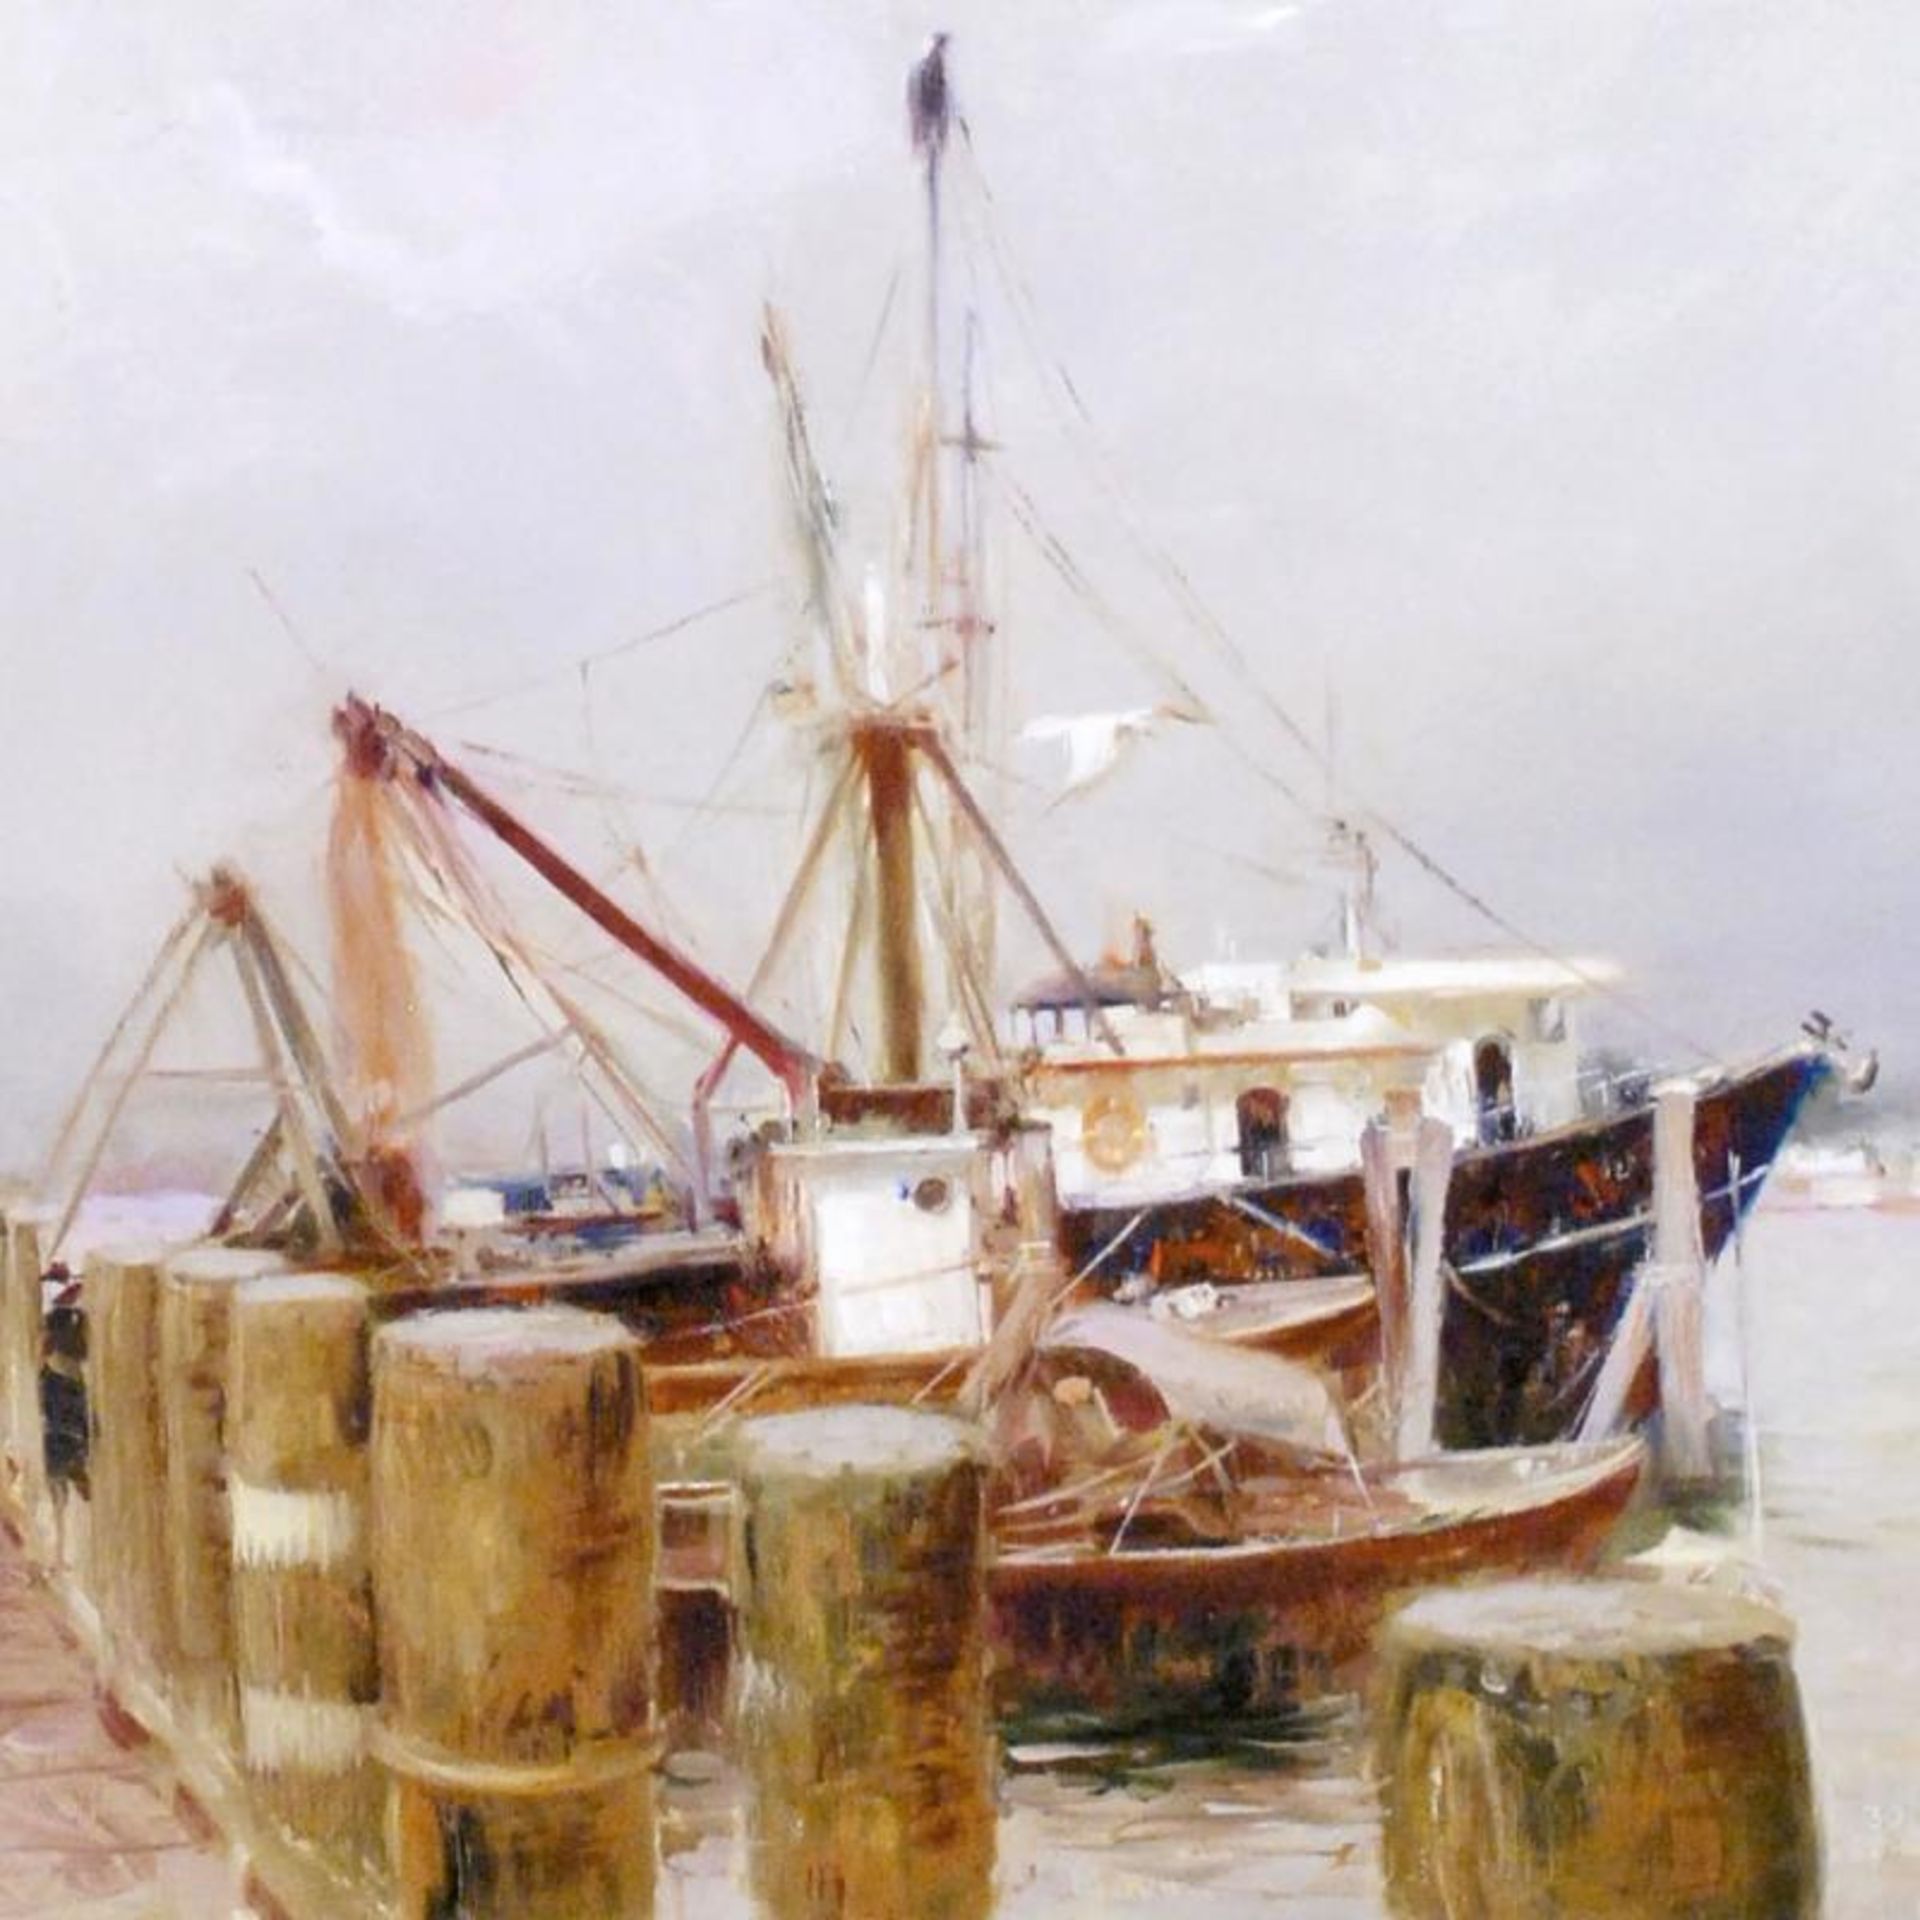 Safe Harbor by Pino (1939-2010) - Image 2 of 2